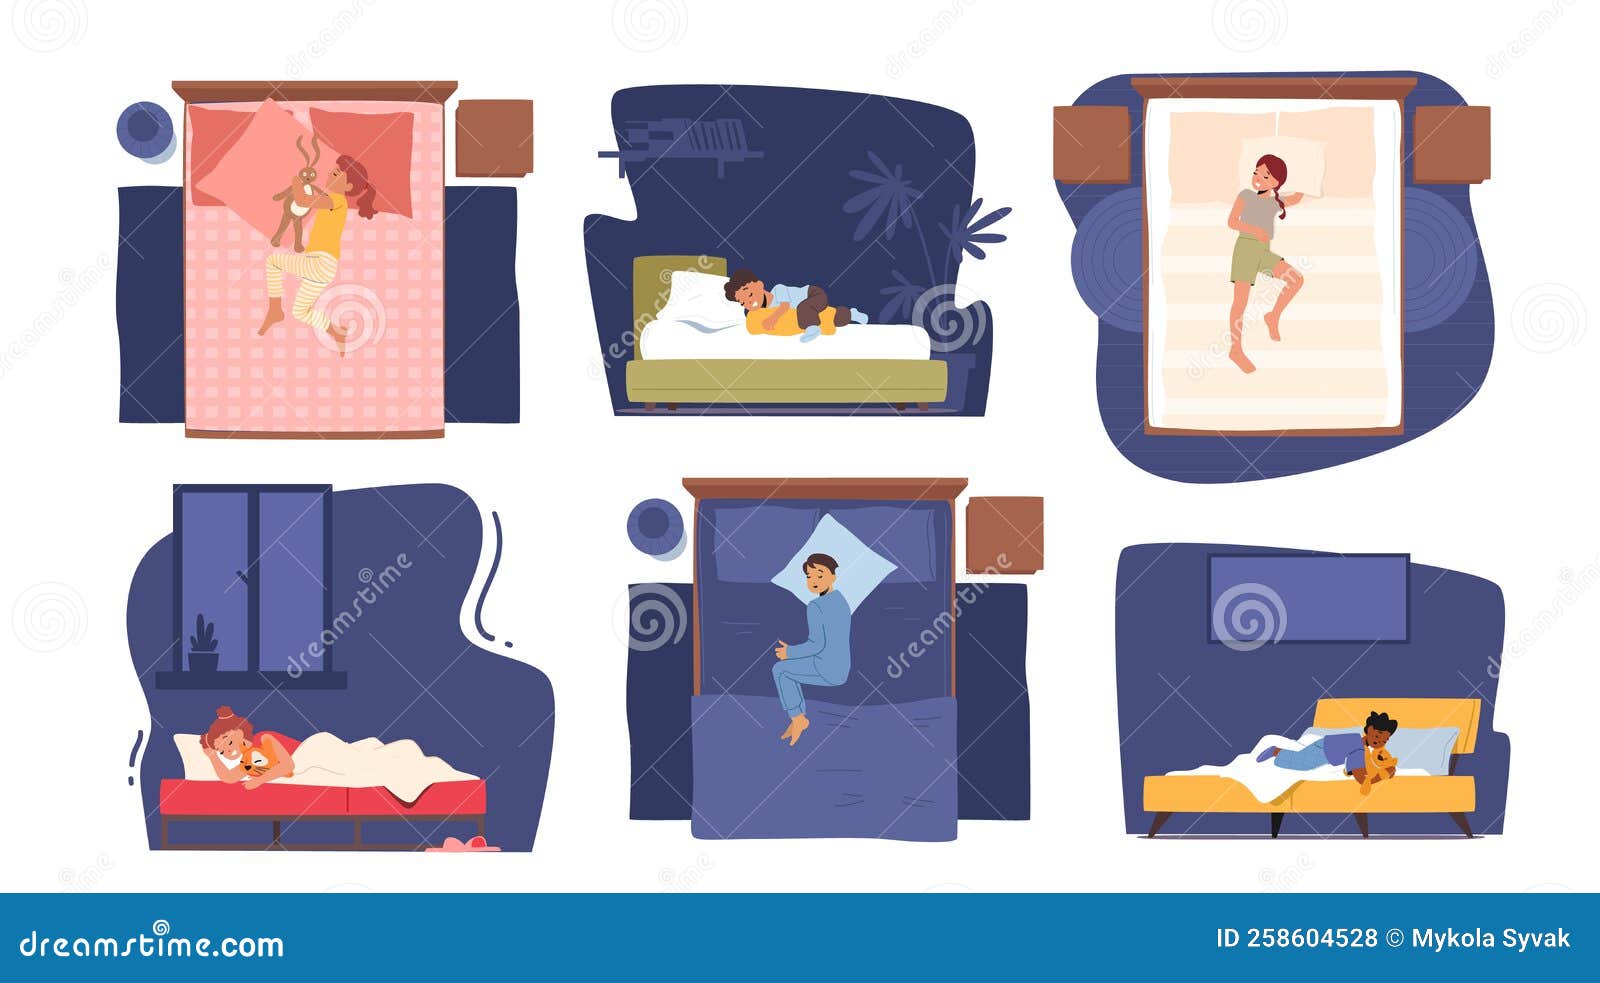 Tired Man in Pajama Sleep on Bed Lying on Side with Pillow between Legs.  Male Character Sleeping in Relaxed Posture Stock Vector